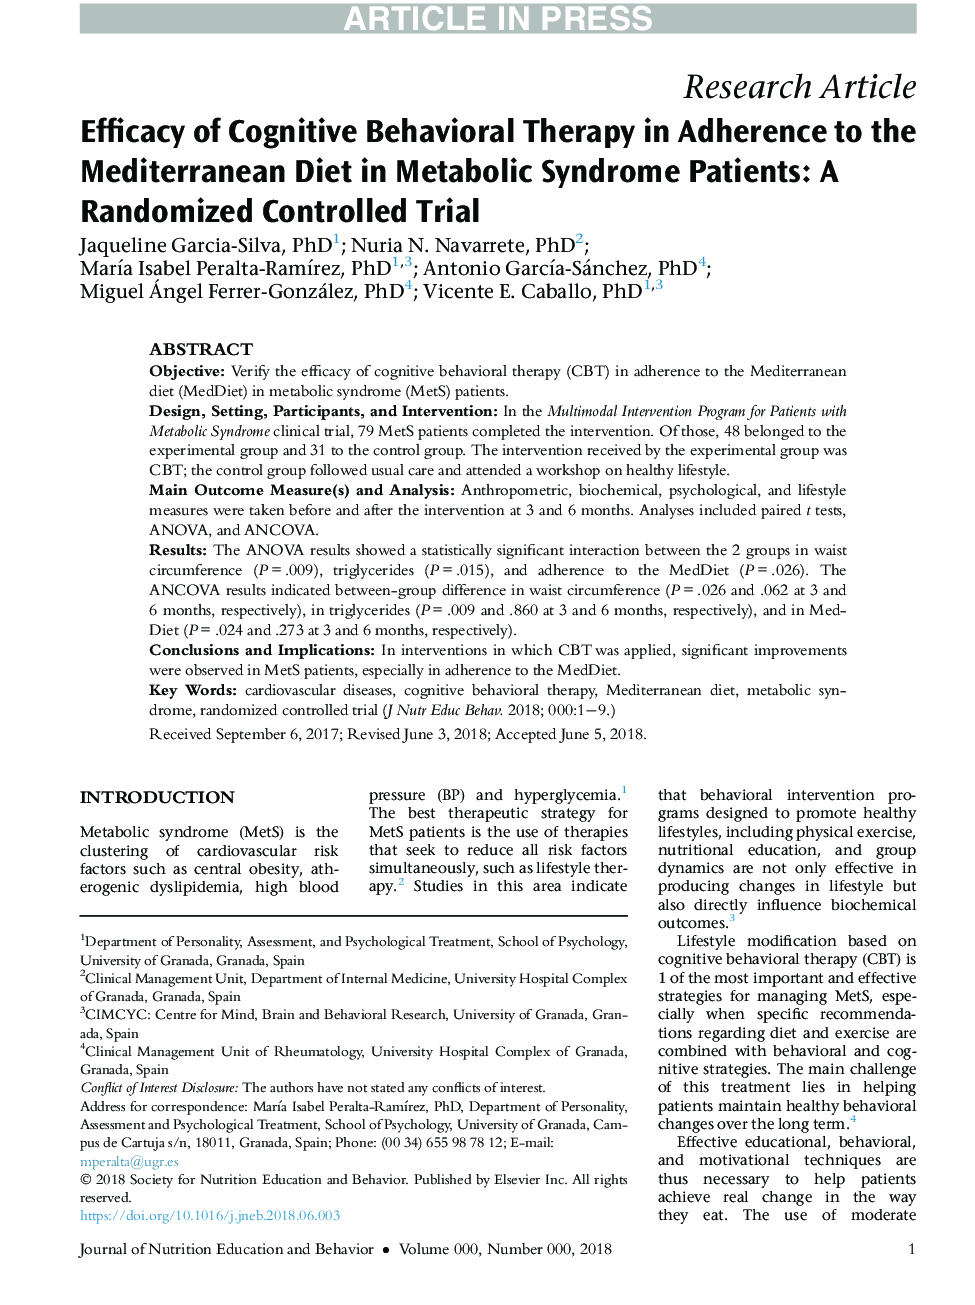 Efficacy of Cognitive Behavioral Therapy in Adherence to the Mediterranean Diet in Metabolic Syndrome Patients: A Randomized Controlled Trial